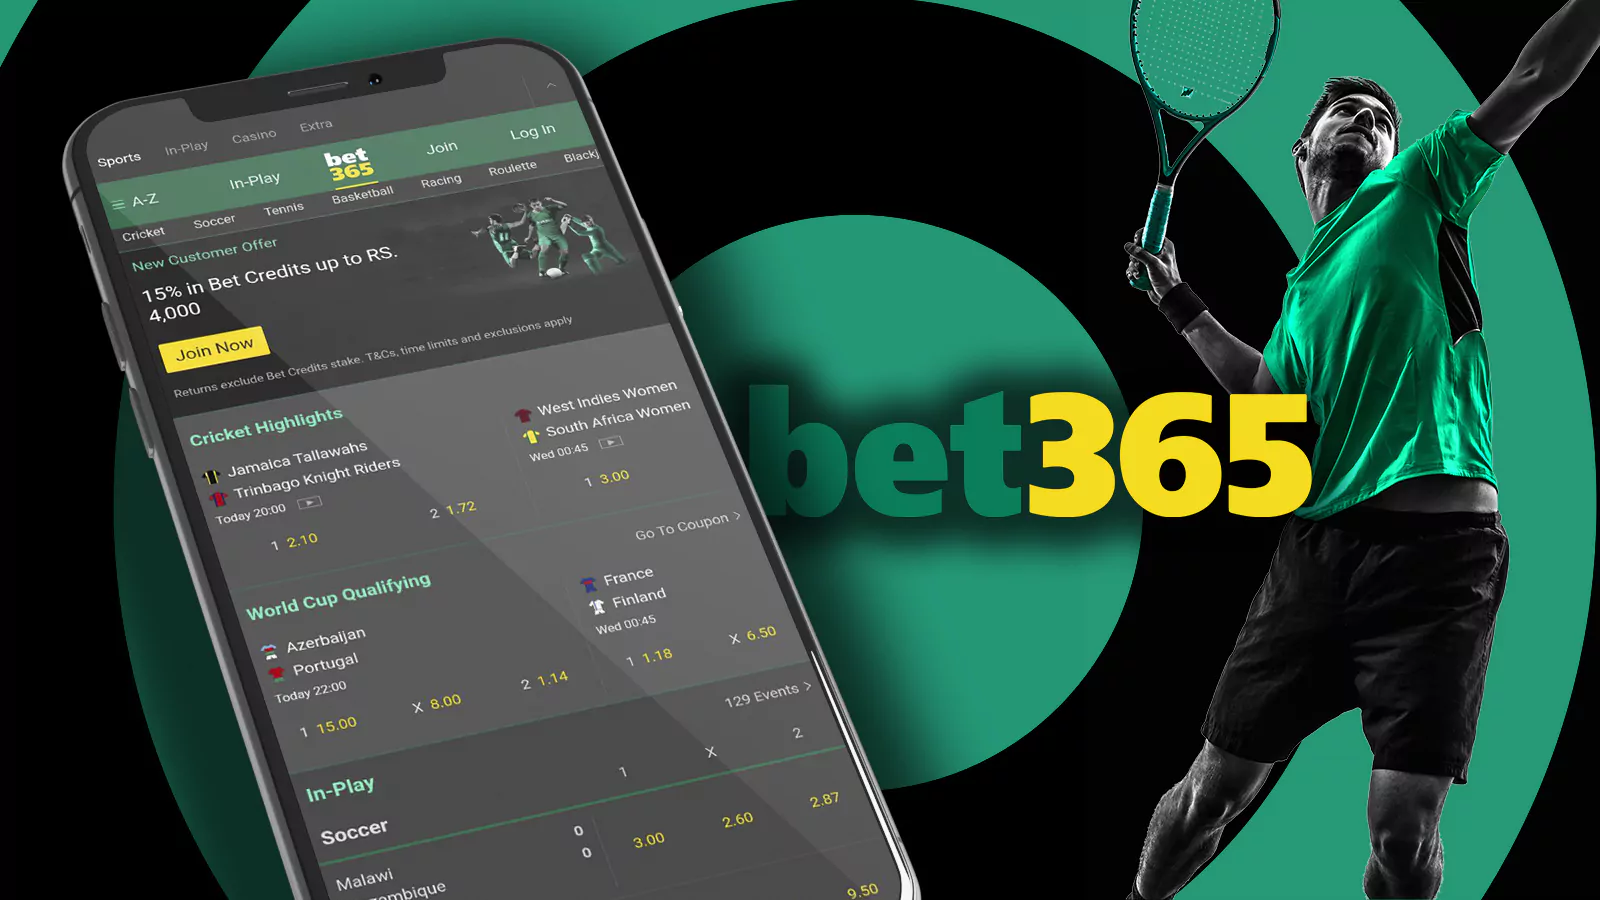 Bet3665 has made own name for itself among users with a great online betting environment and a brilliant reputation and usability.